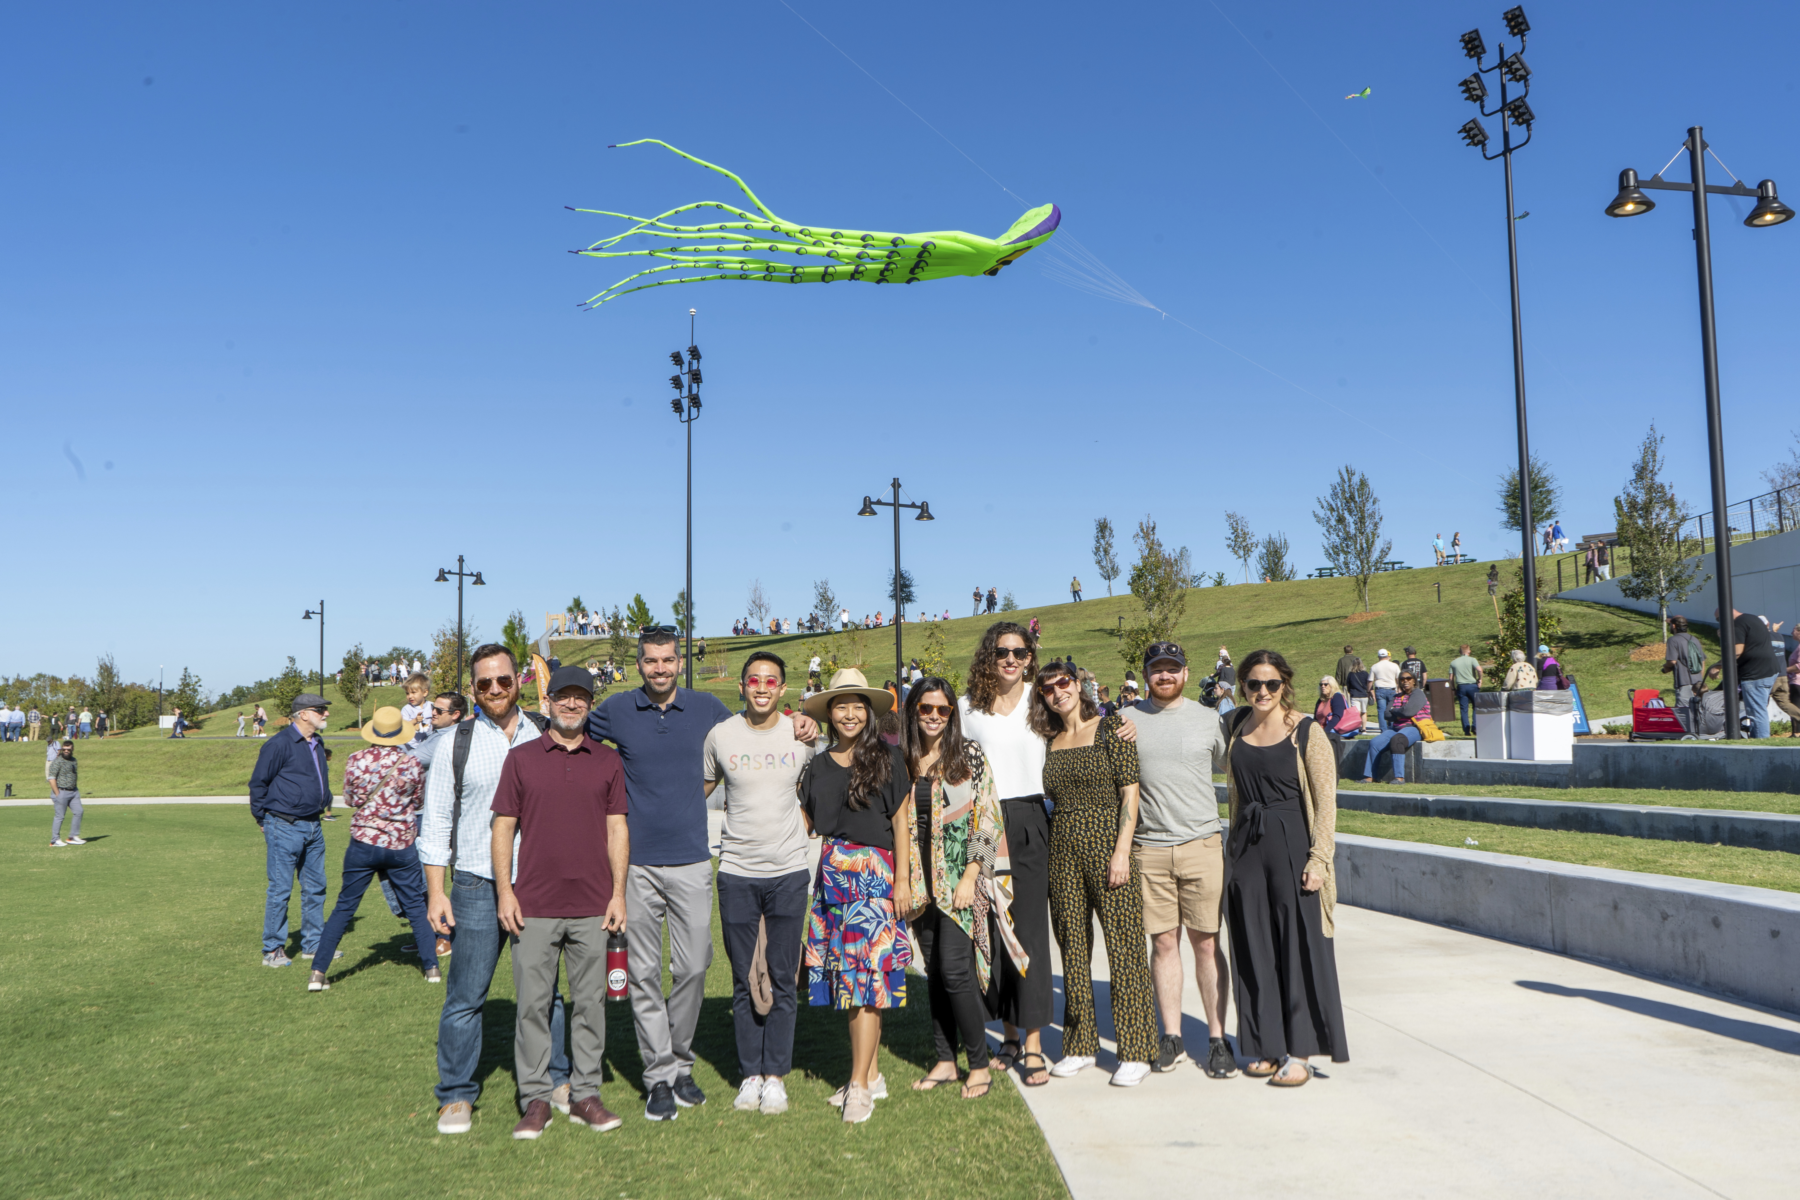 The Sasaki design team posing as a group with a green kite flying against a blue sky behind them